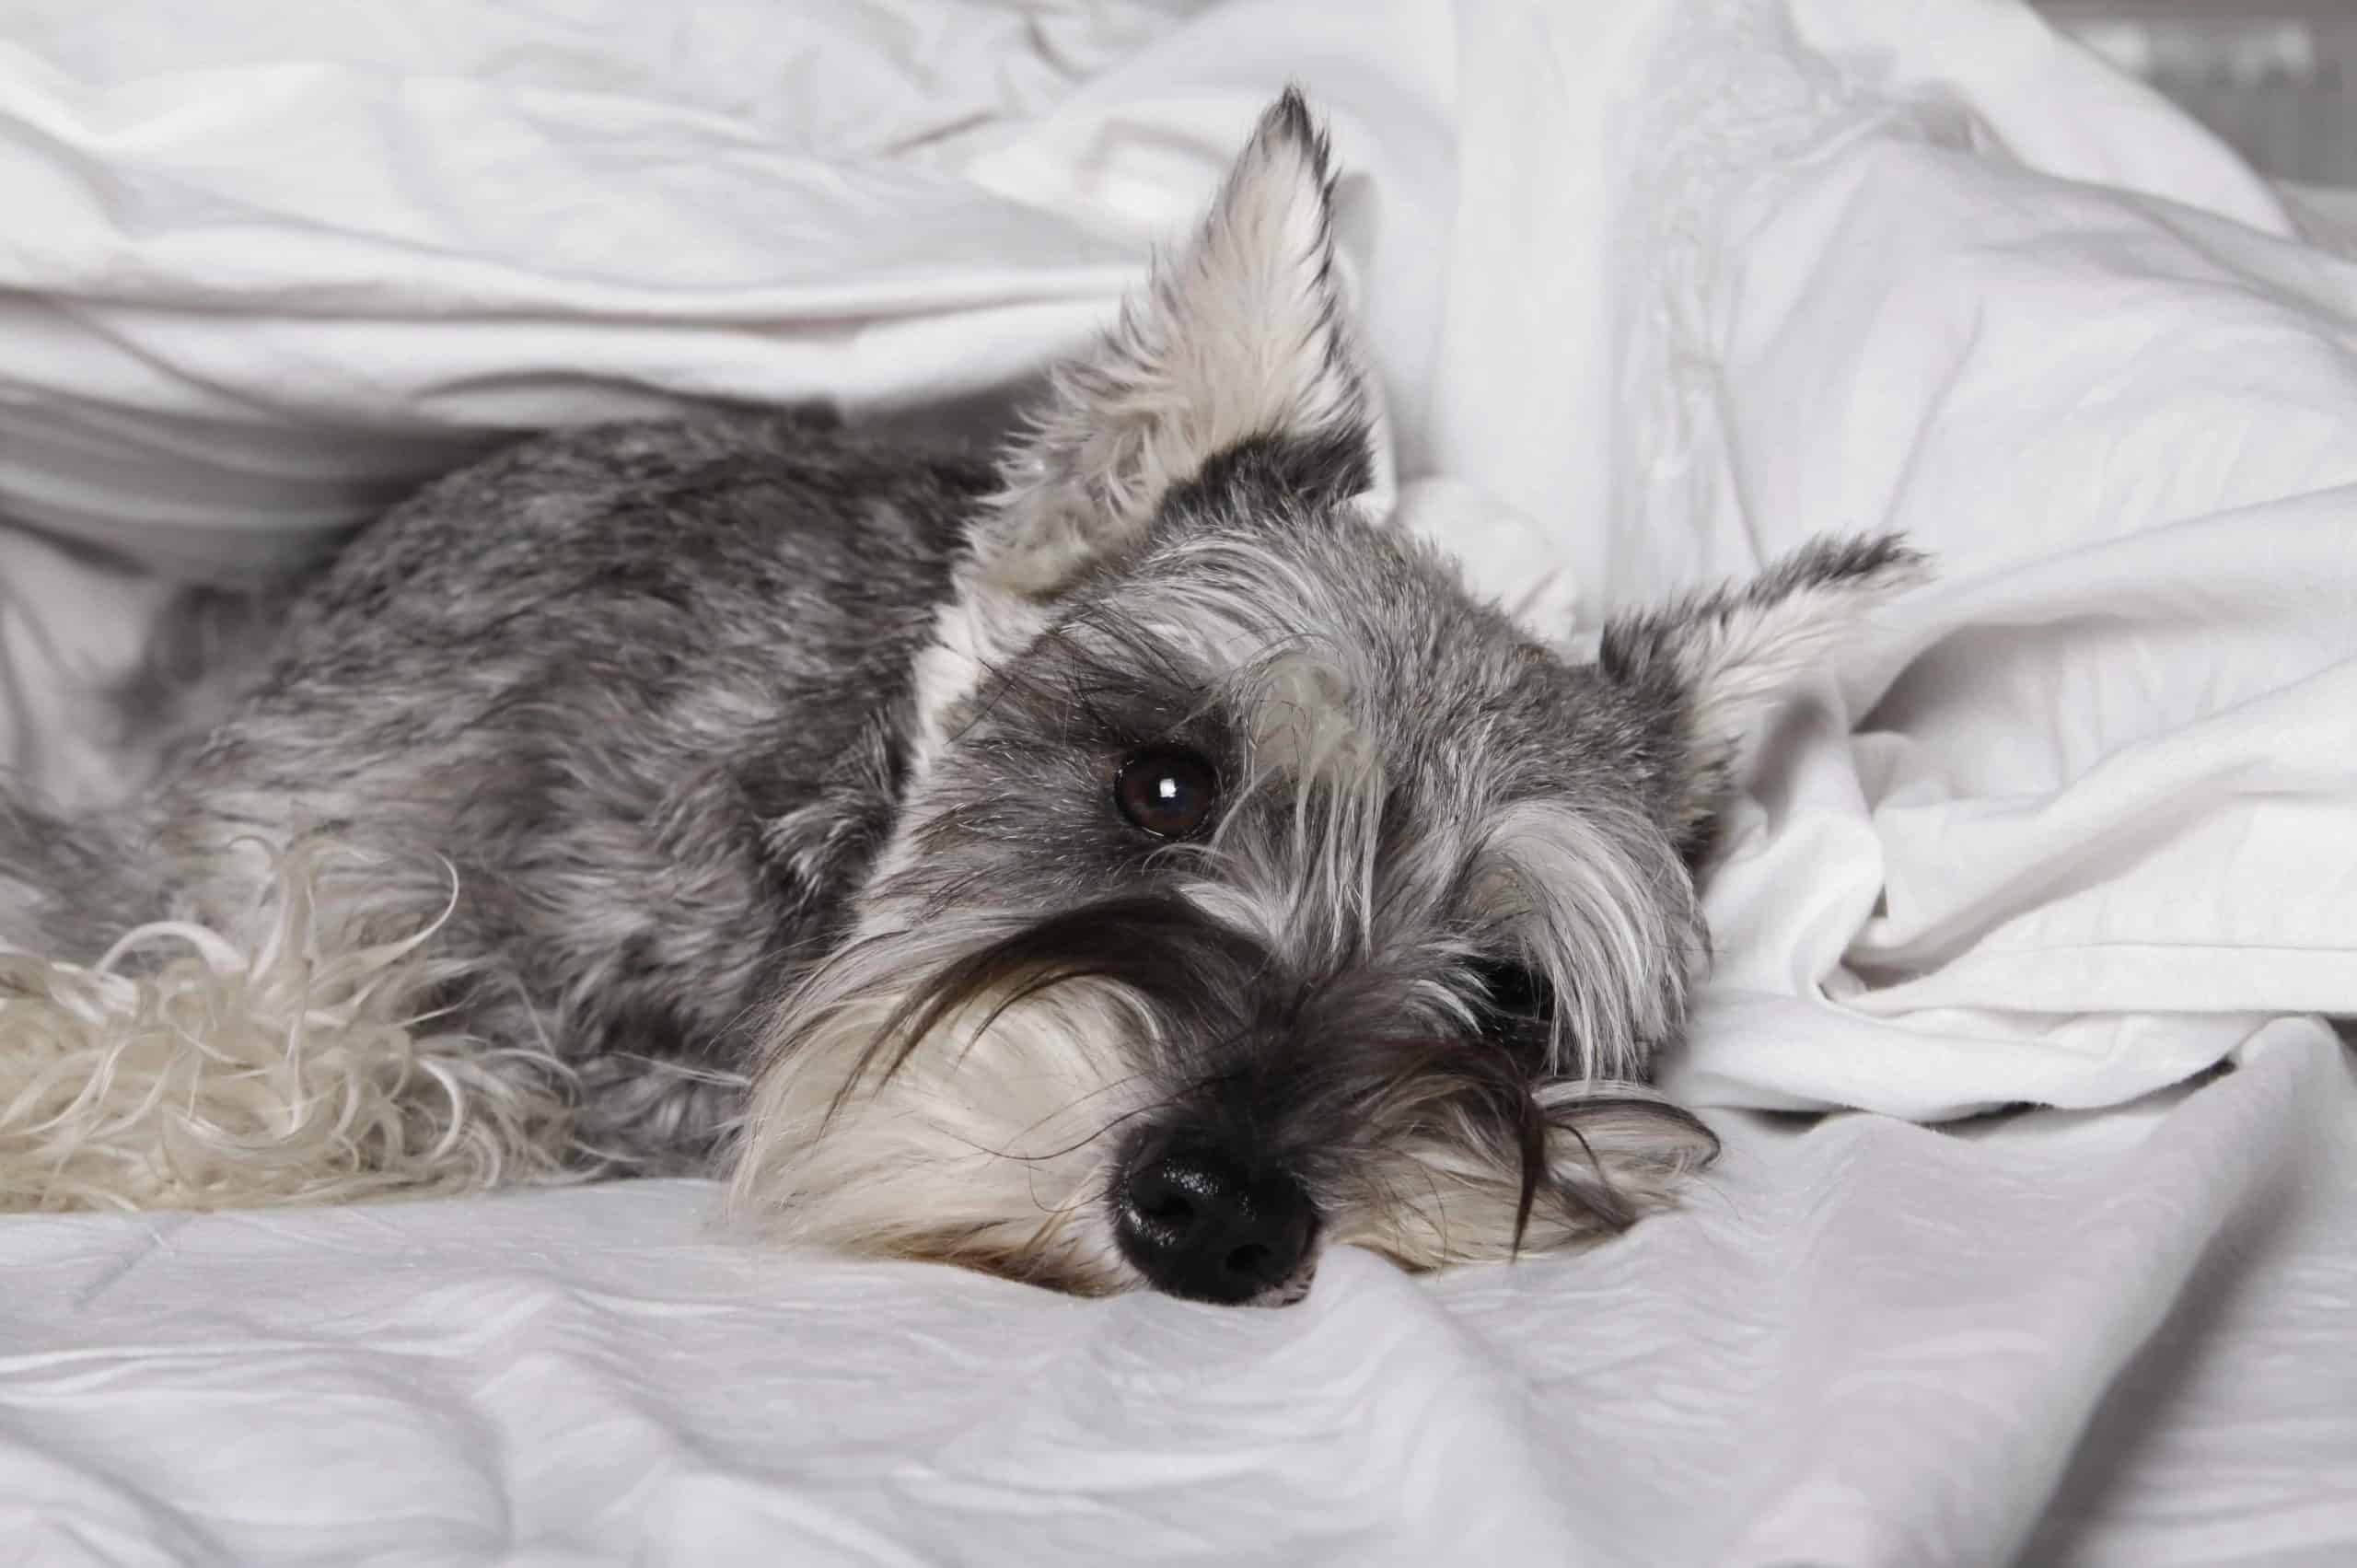 Sick mini-Schnauzer lies on bed. Worms cause serious health issues if untreated. Every dog owner needs to know the risks, symptoms, diagnosis, and treatment options.